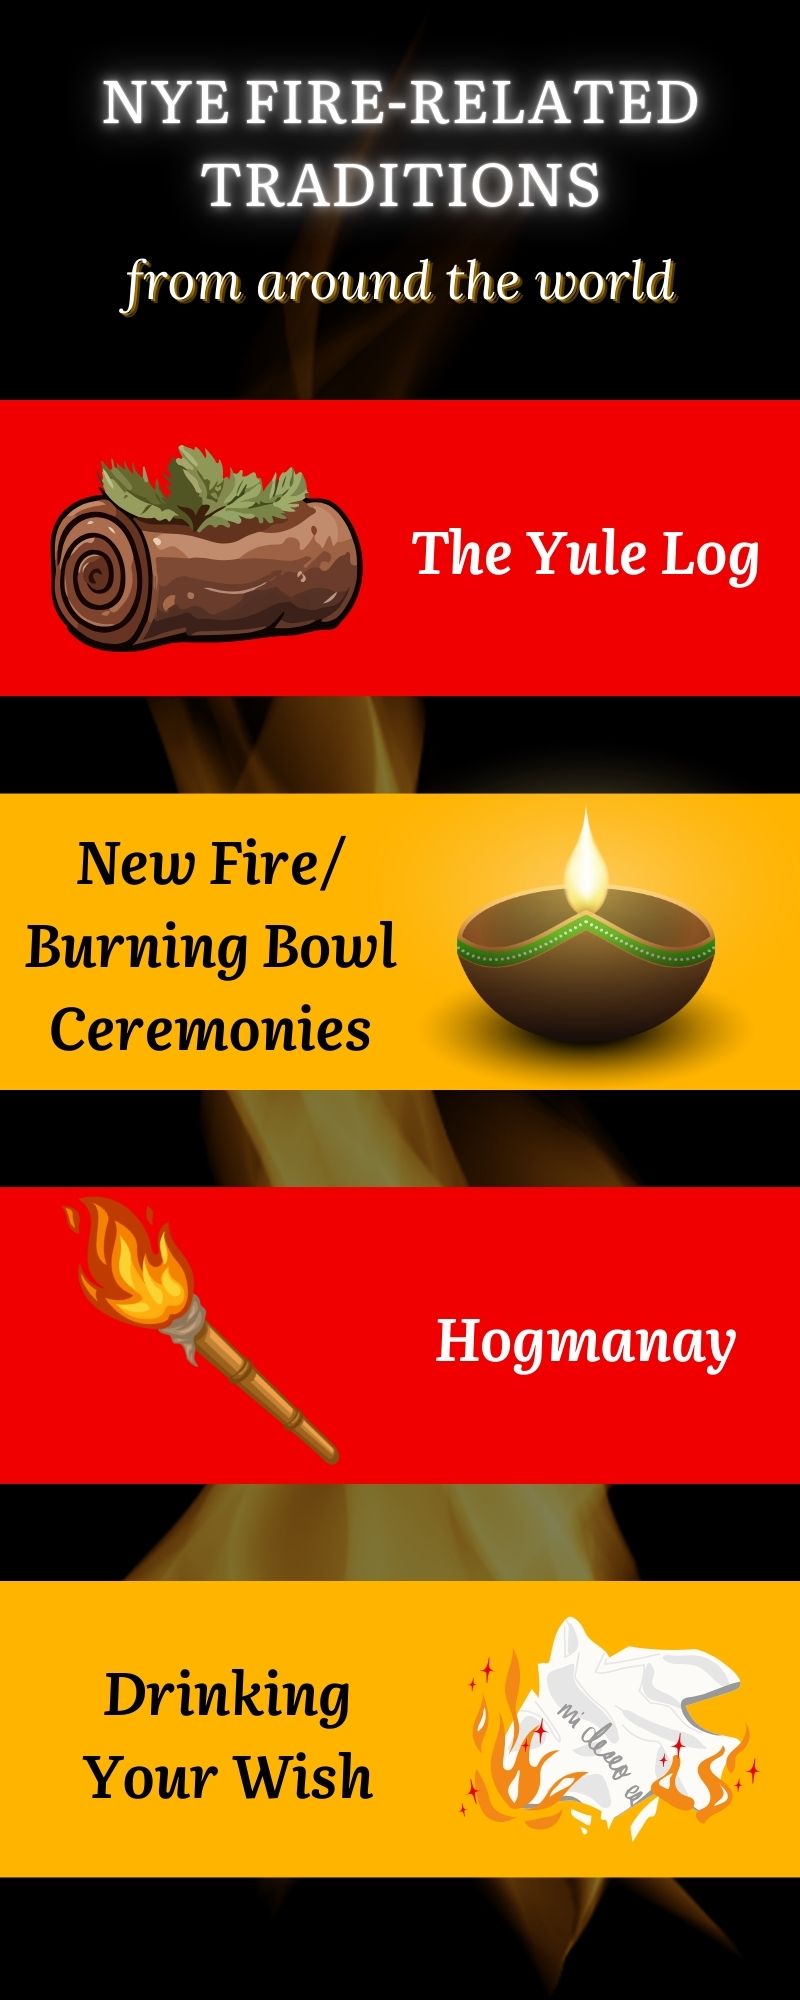 original infographic telling of different fireside NYE traditions